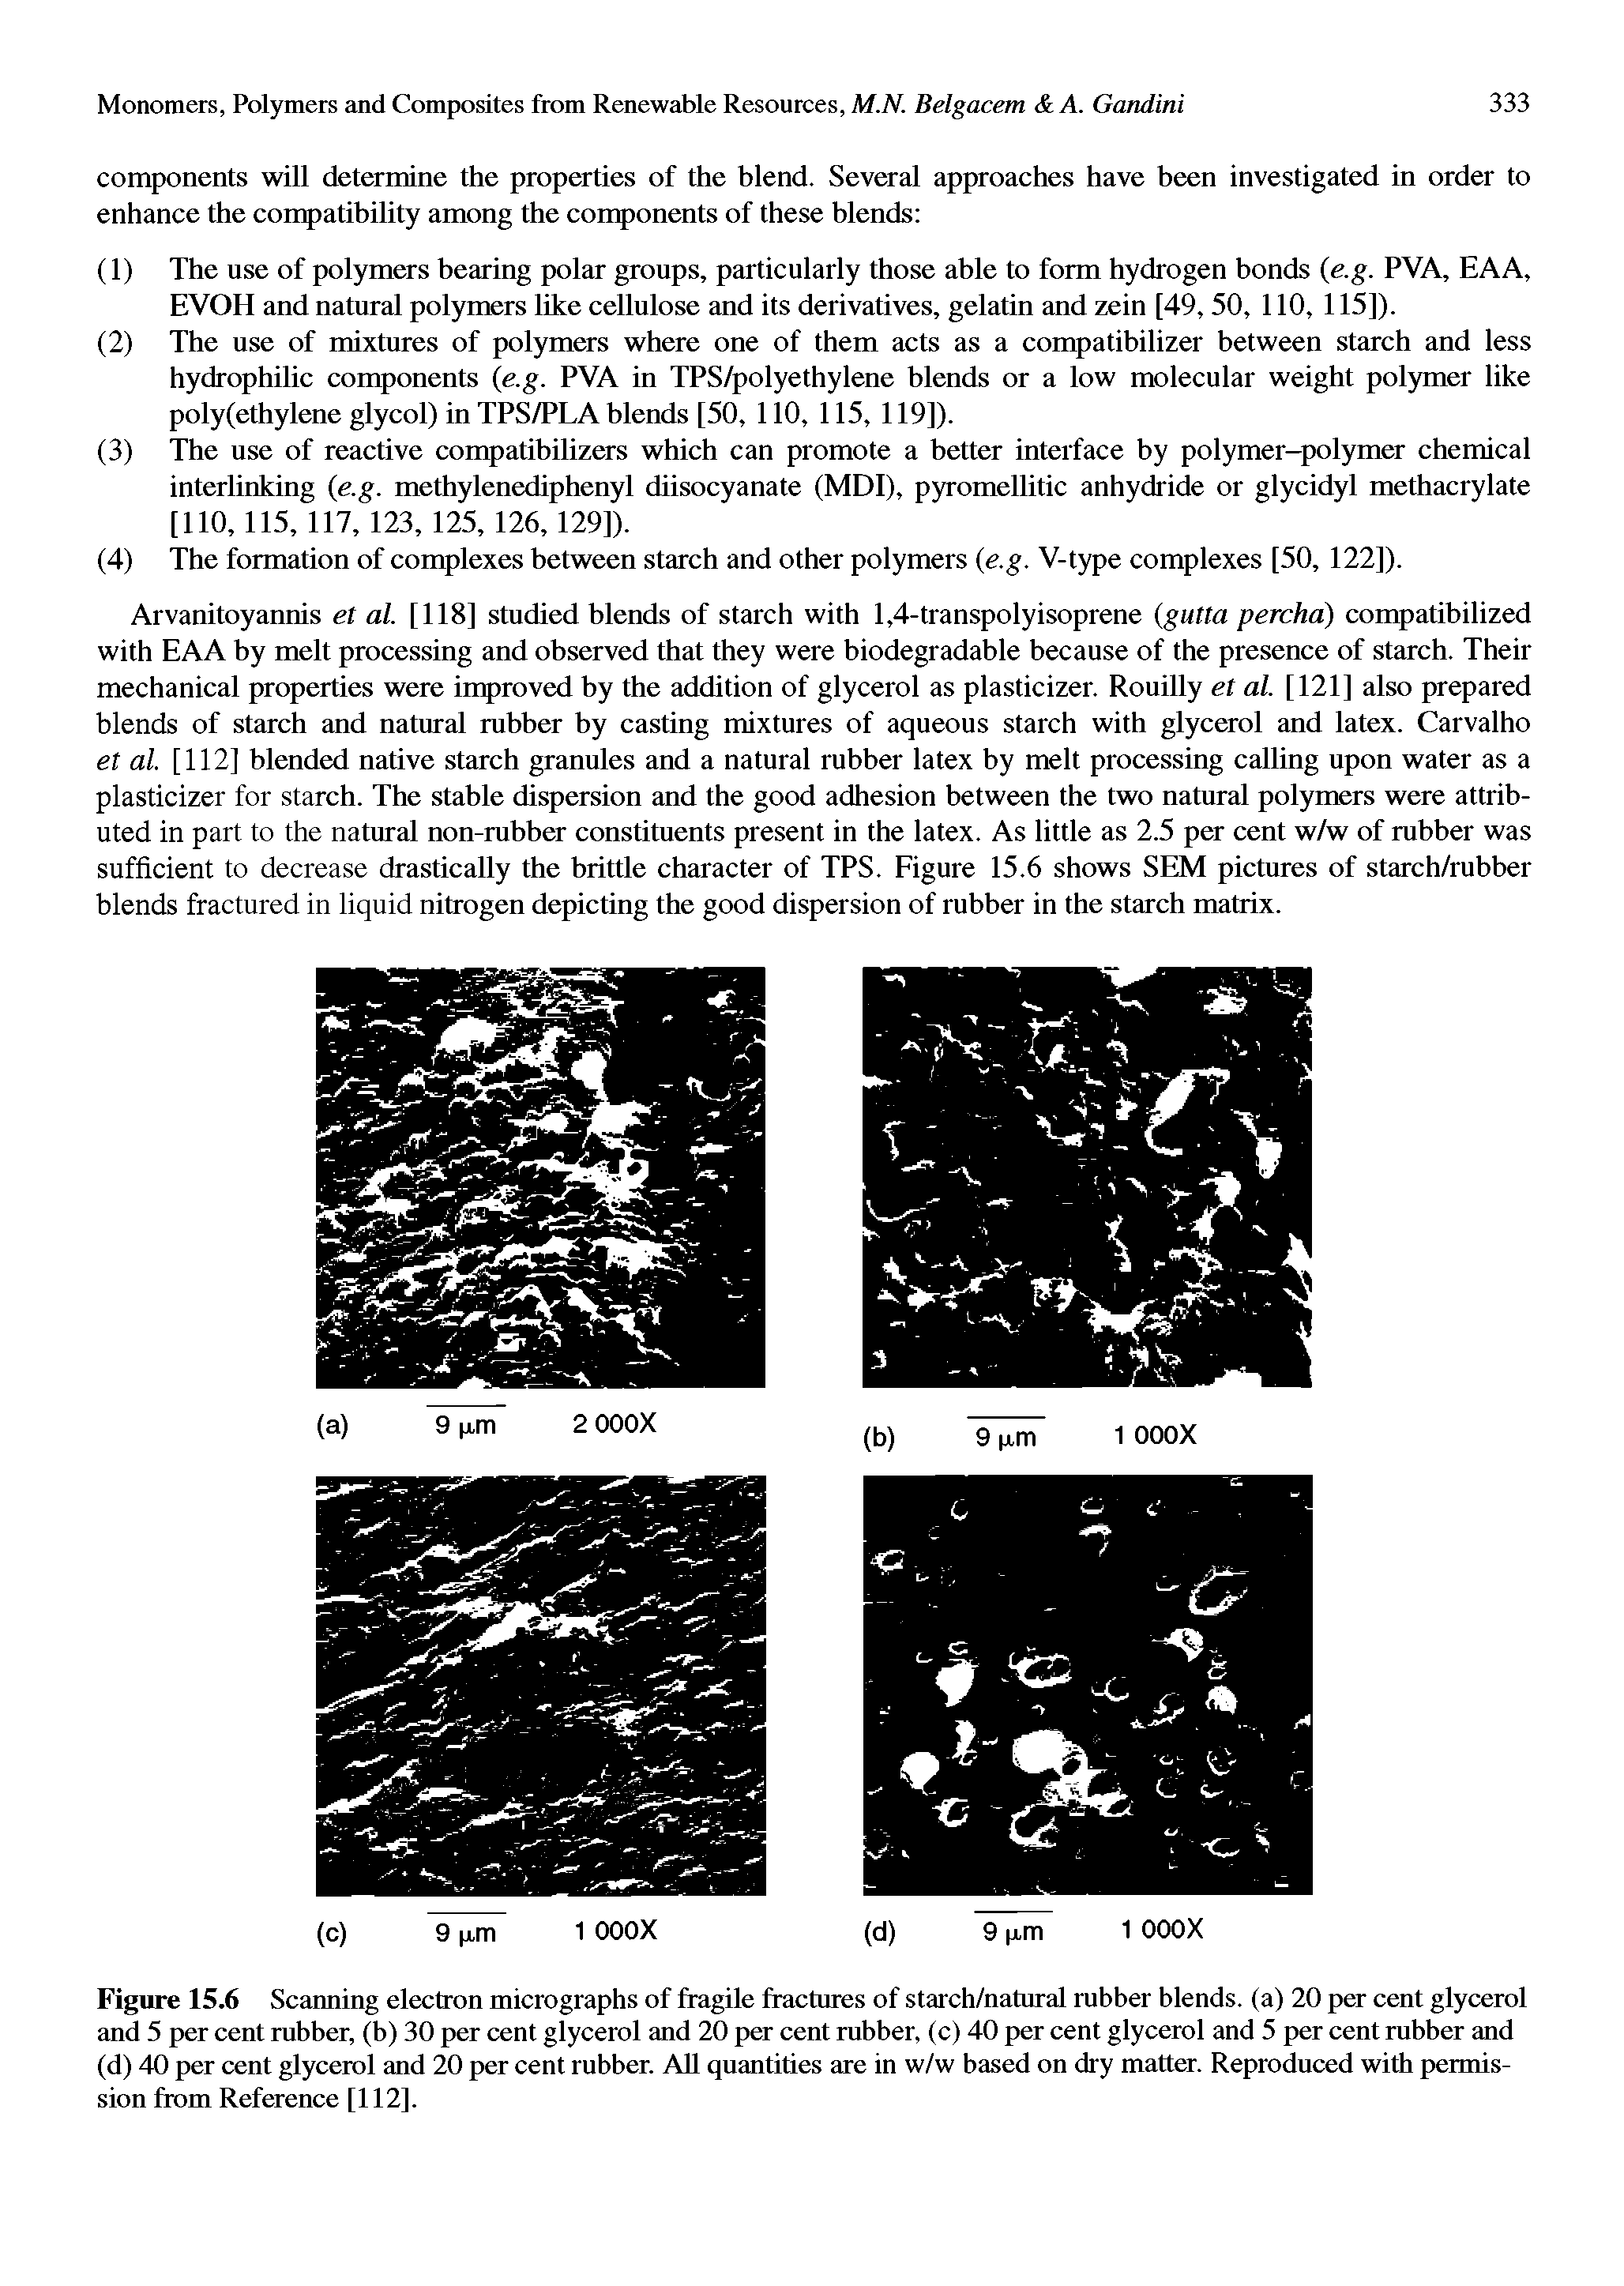 Figure 15.6 Scanning electron micrographs of fragile fractnres of starch/natural rubber blends, (a) 20 per cent glycerol and 5 per cent rabber, (b) 30 per cent glycerol and 20 per cent rabber, (c) 40 per cent glycerol and 5 per cent rabber and (d) 40 per cent glycerol and 20 per cent rubber. AH quantities are in w/w based on dry matter. Reproduced with permission from Reference [112].